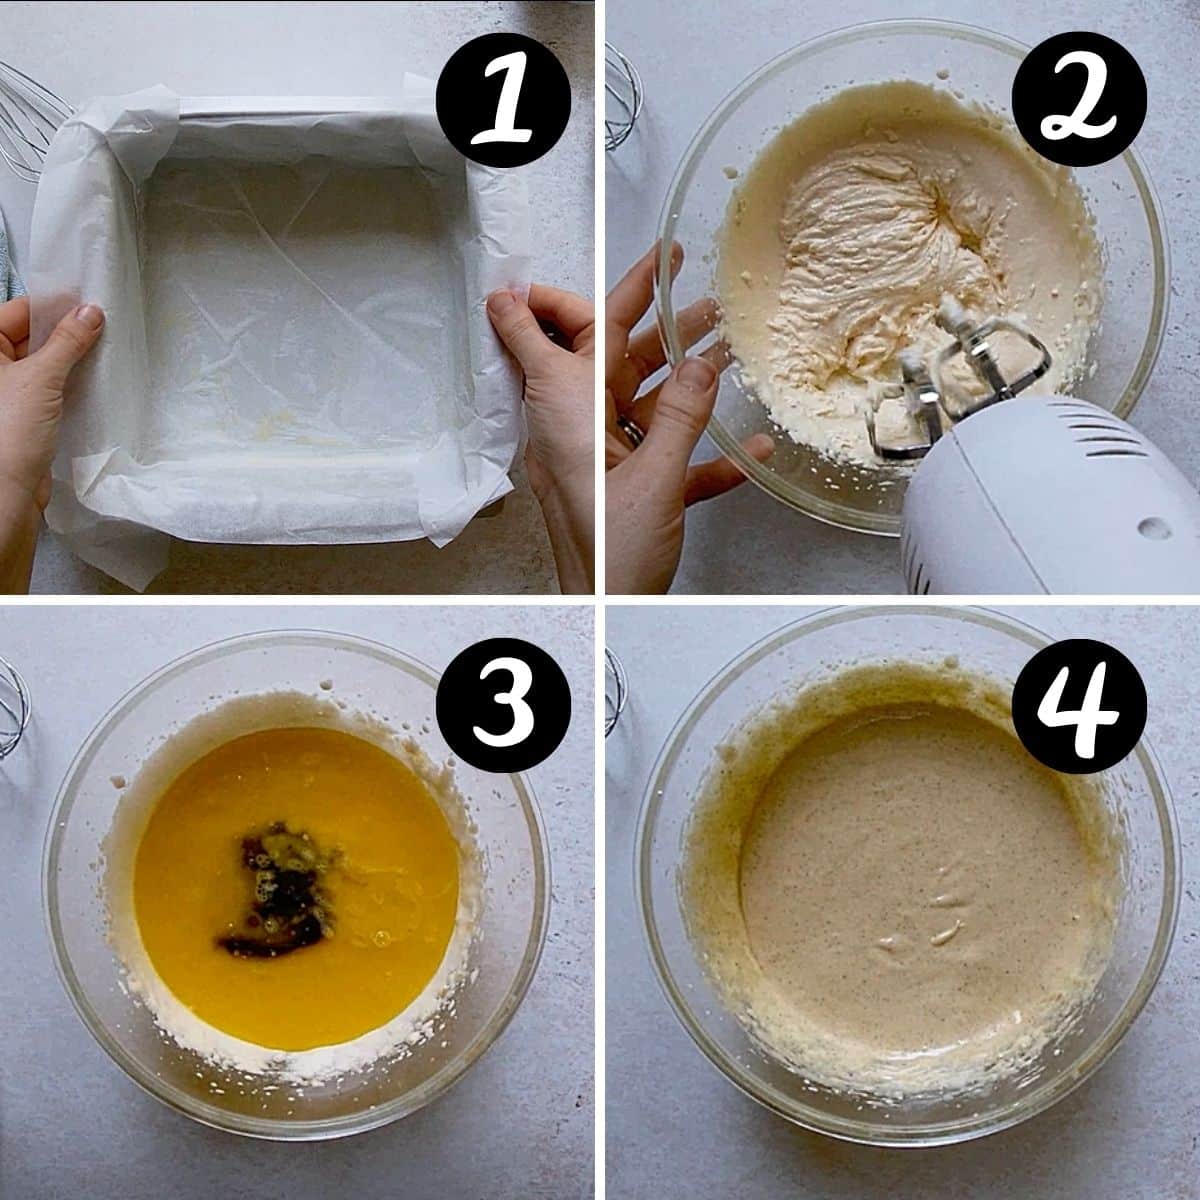 step by step image of egg yolks being beaten with sugar, butter and vanilla